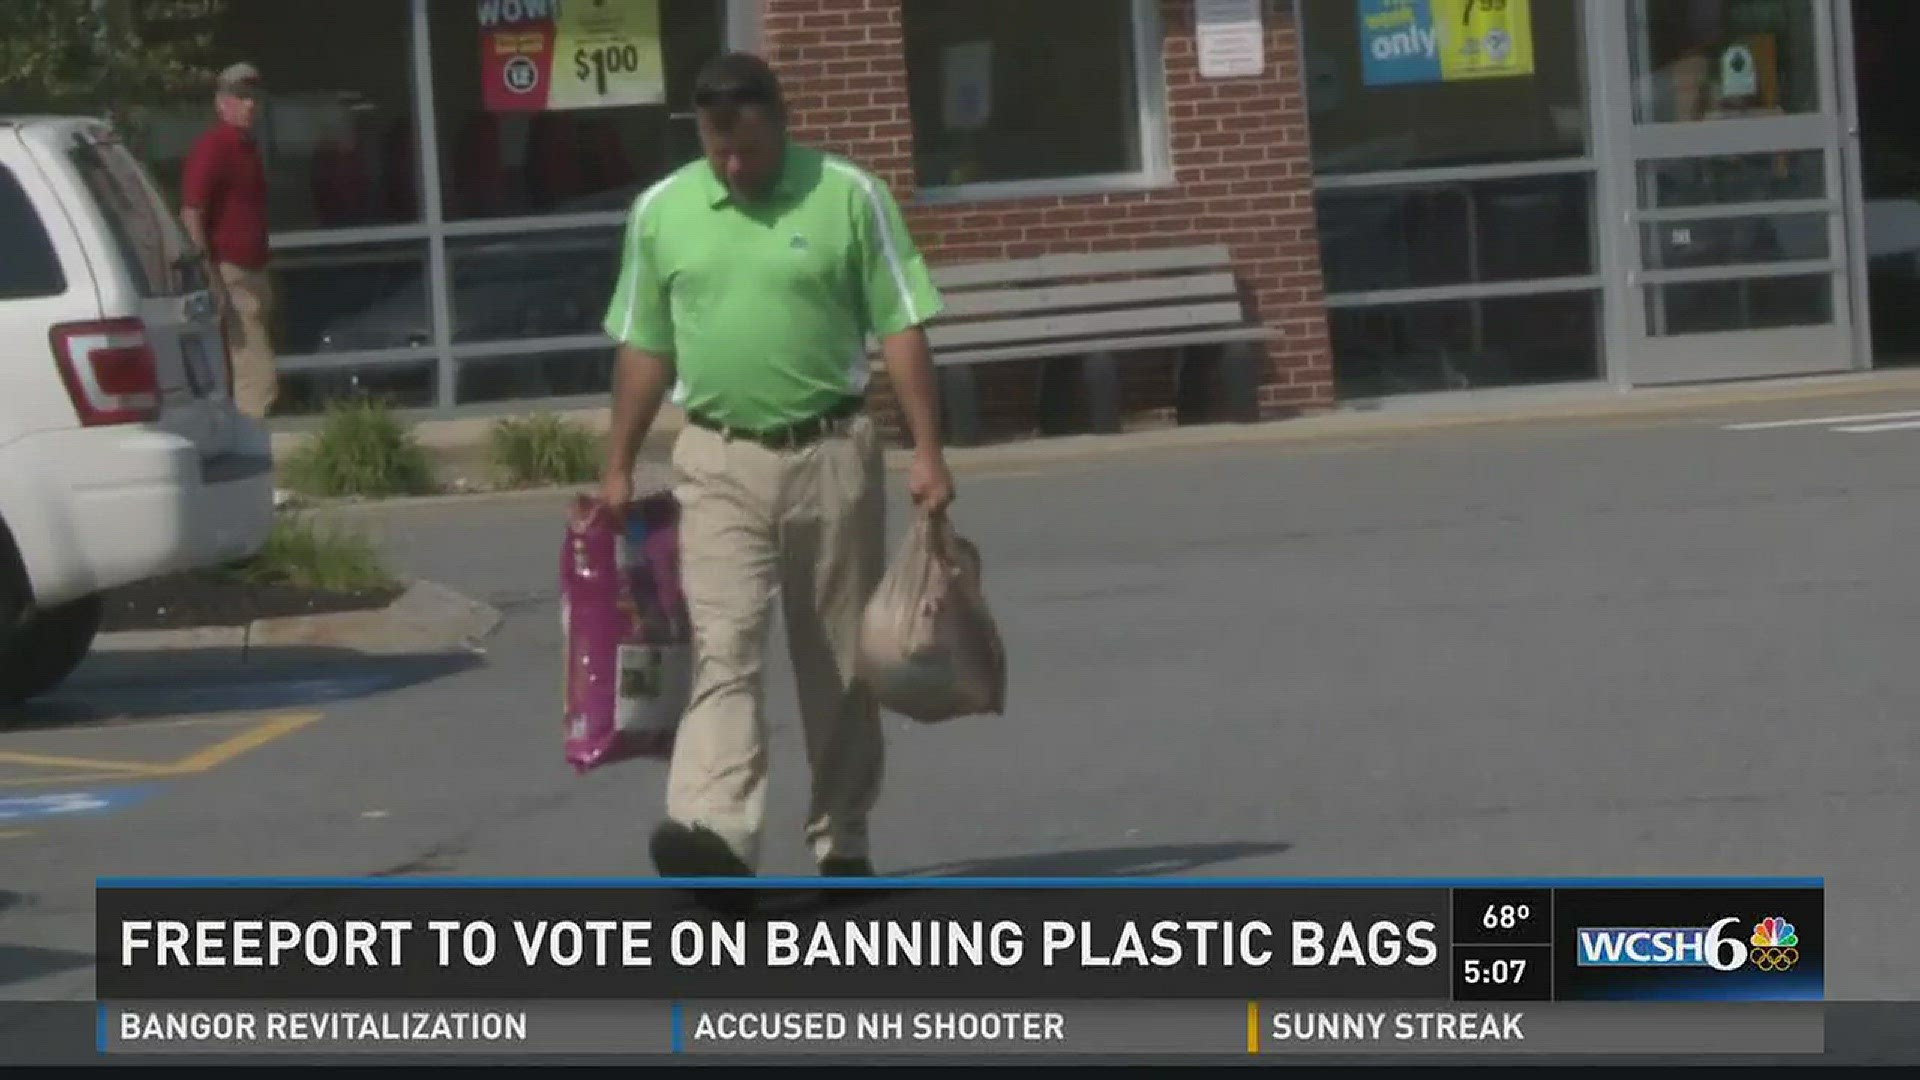 Freeport to vote on banning plastic bags